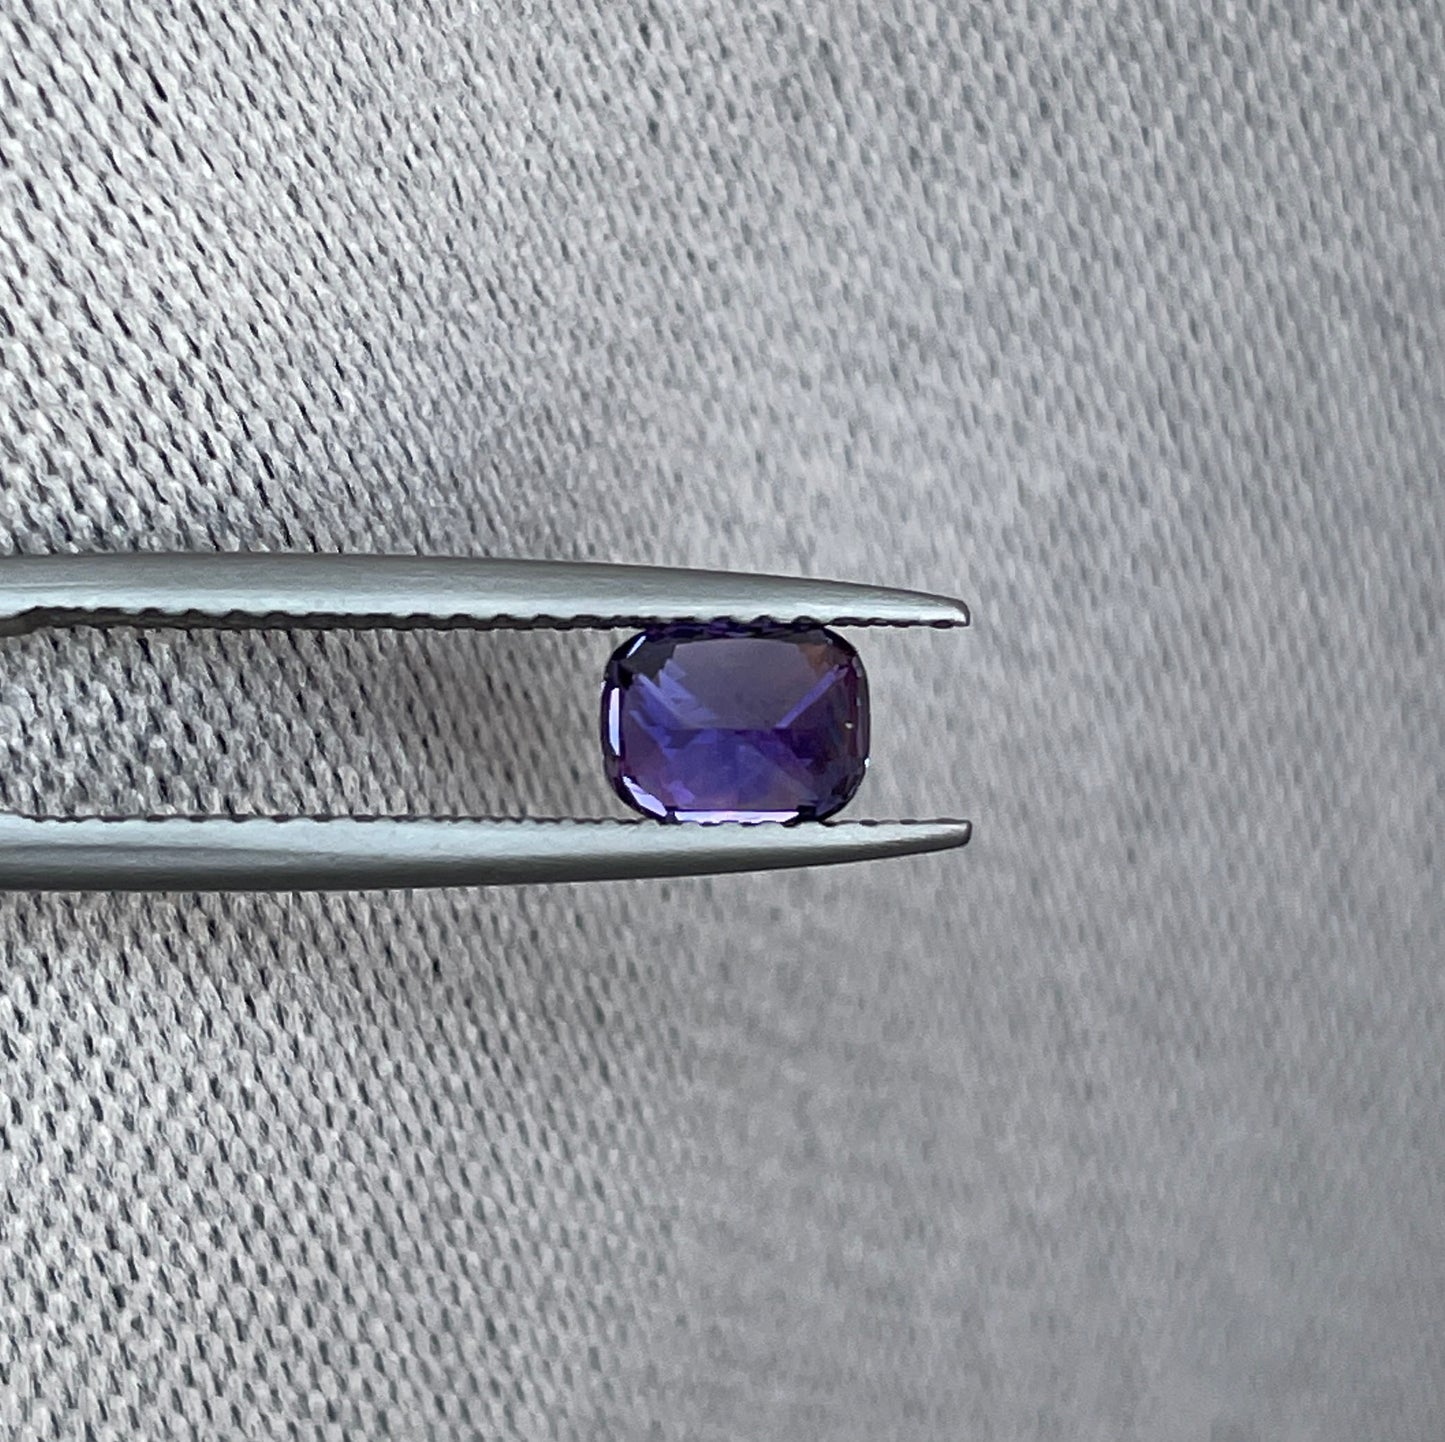 AAA Color change Ceylon violet Sapphire Loose cushion Cut Gemstone, Fine Quality violet Sapphire Ring And Jewelry Making Gemstone 1.02 Ct